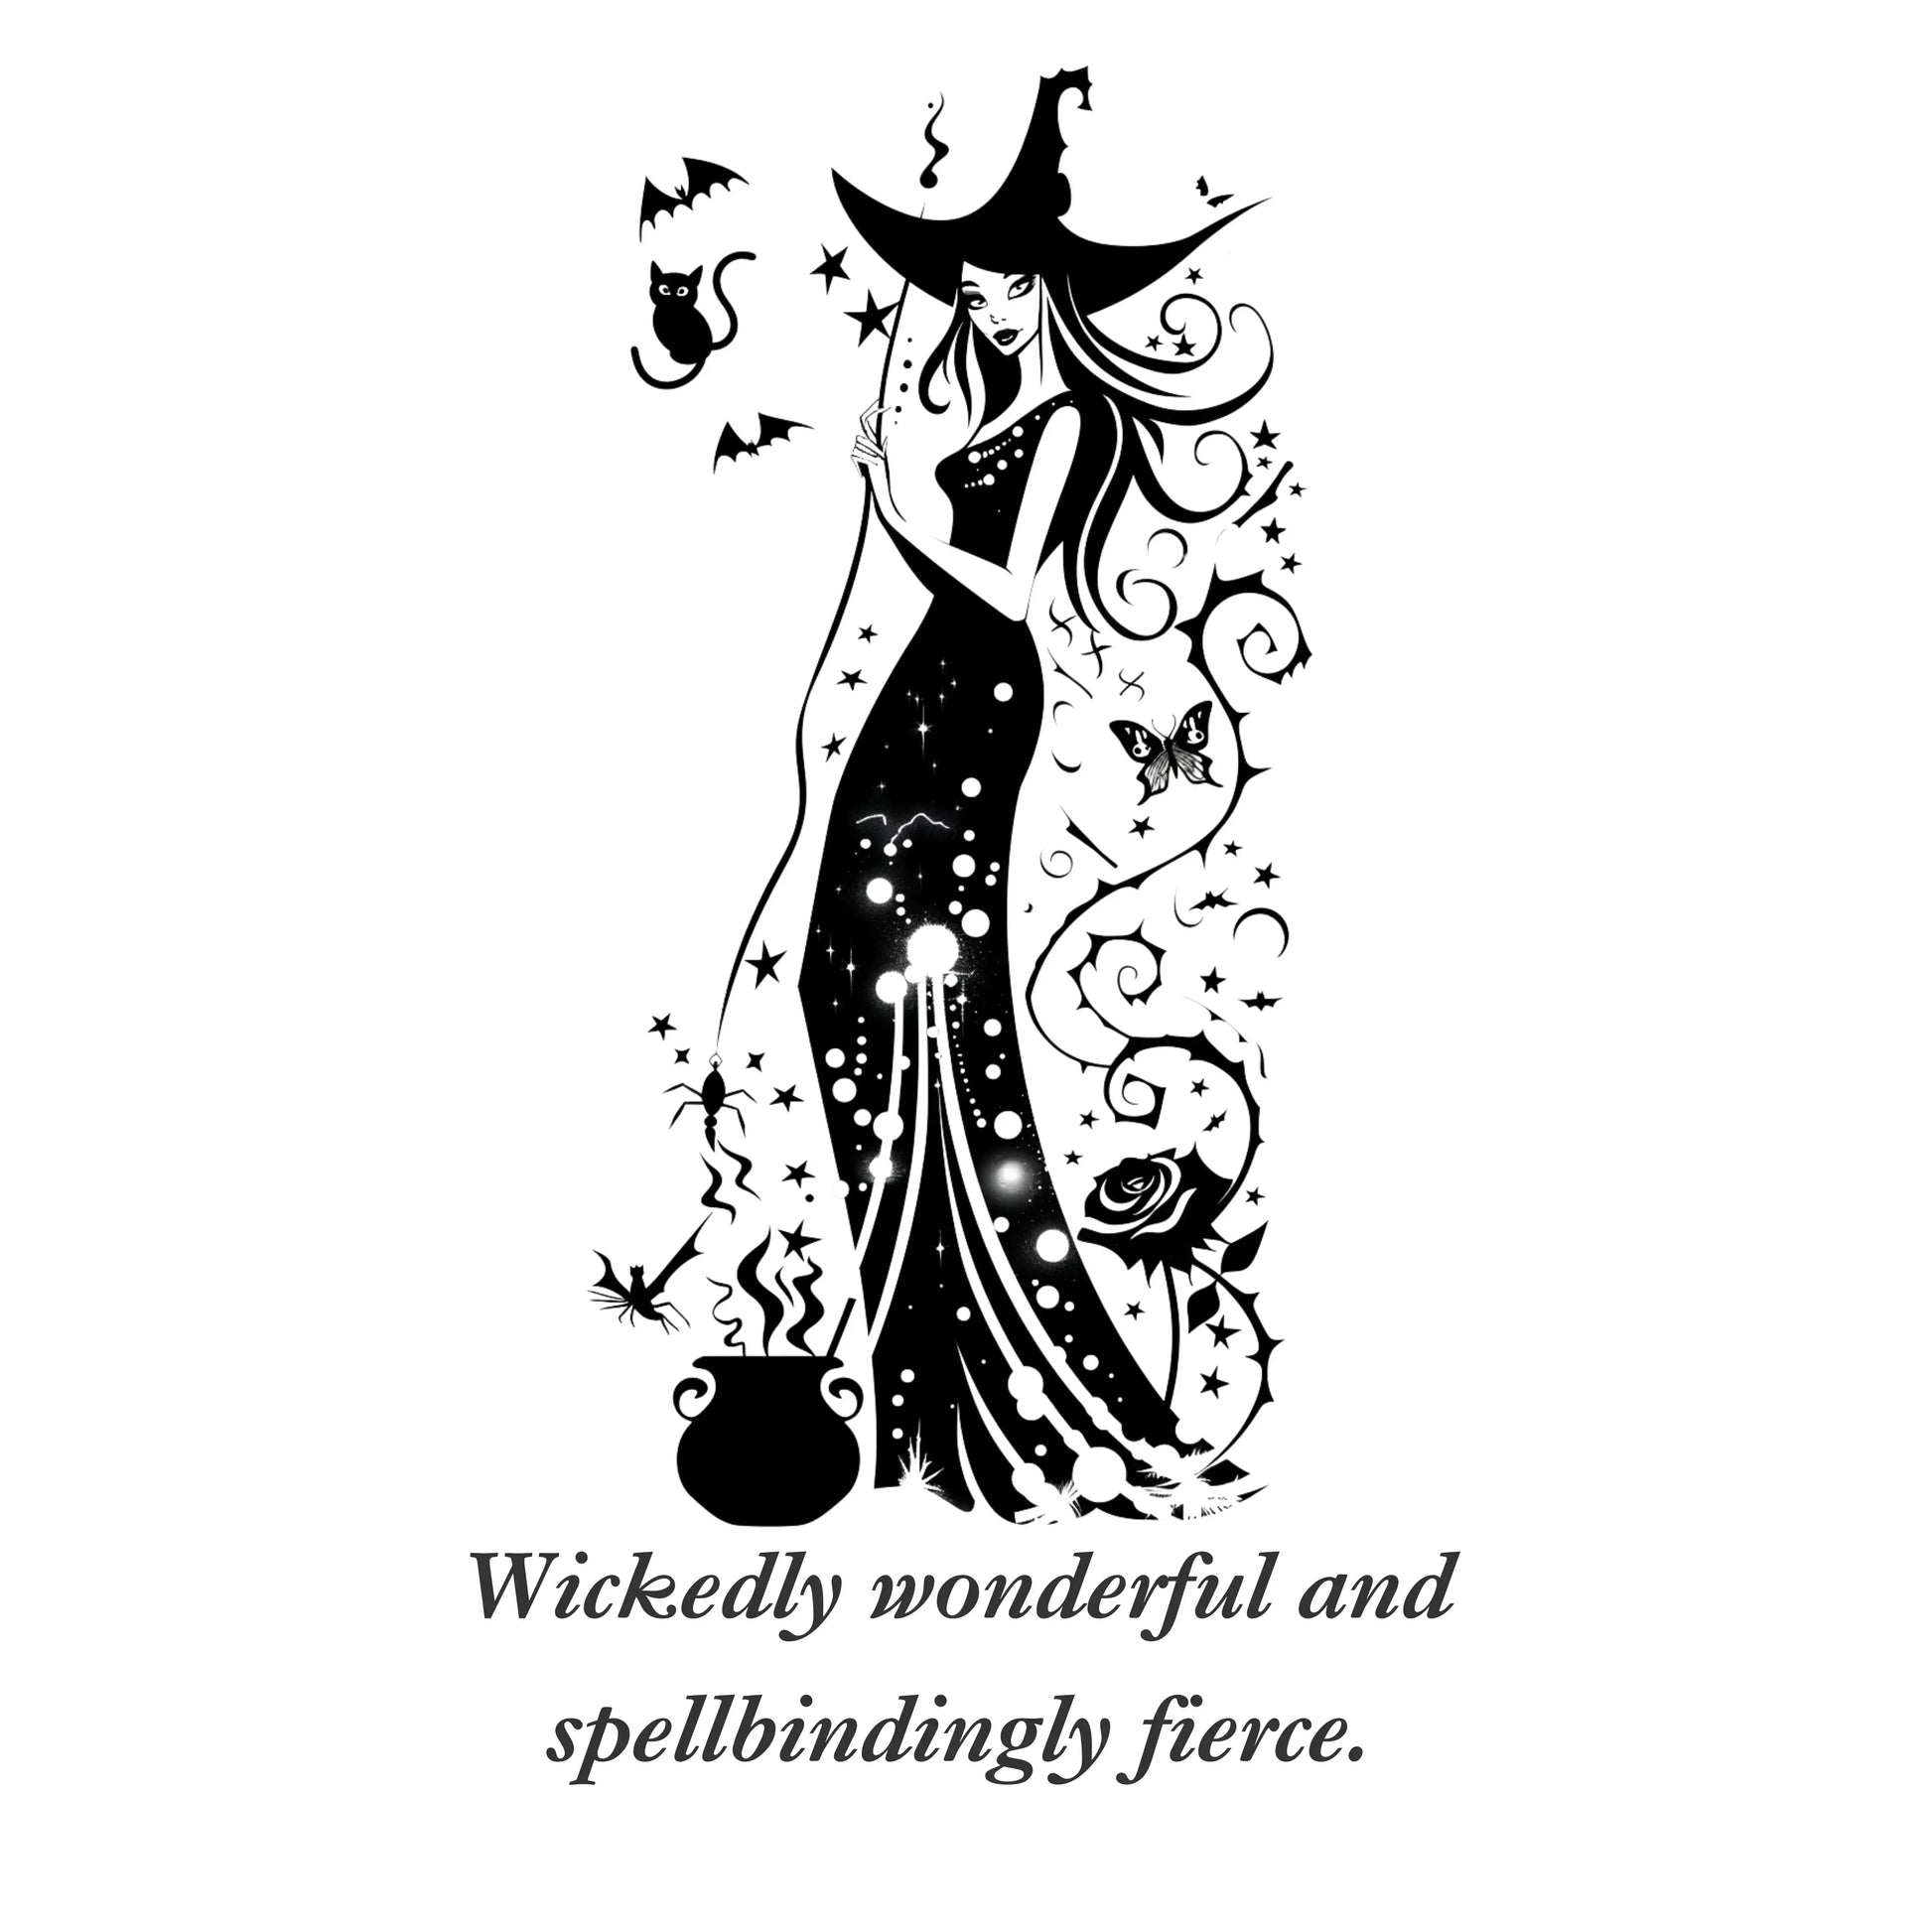 Wickedly wonderful and spelled bindingly fierce graphic design from Blk Moon Shop.